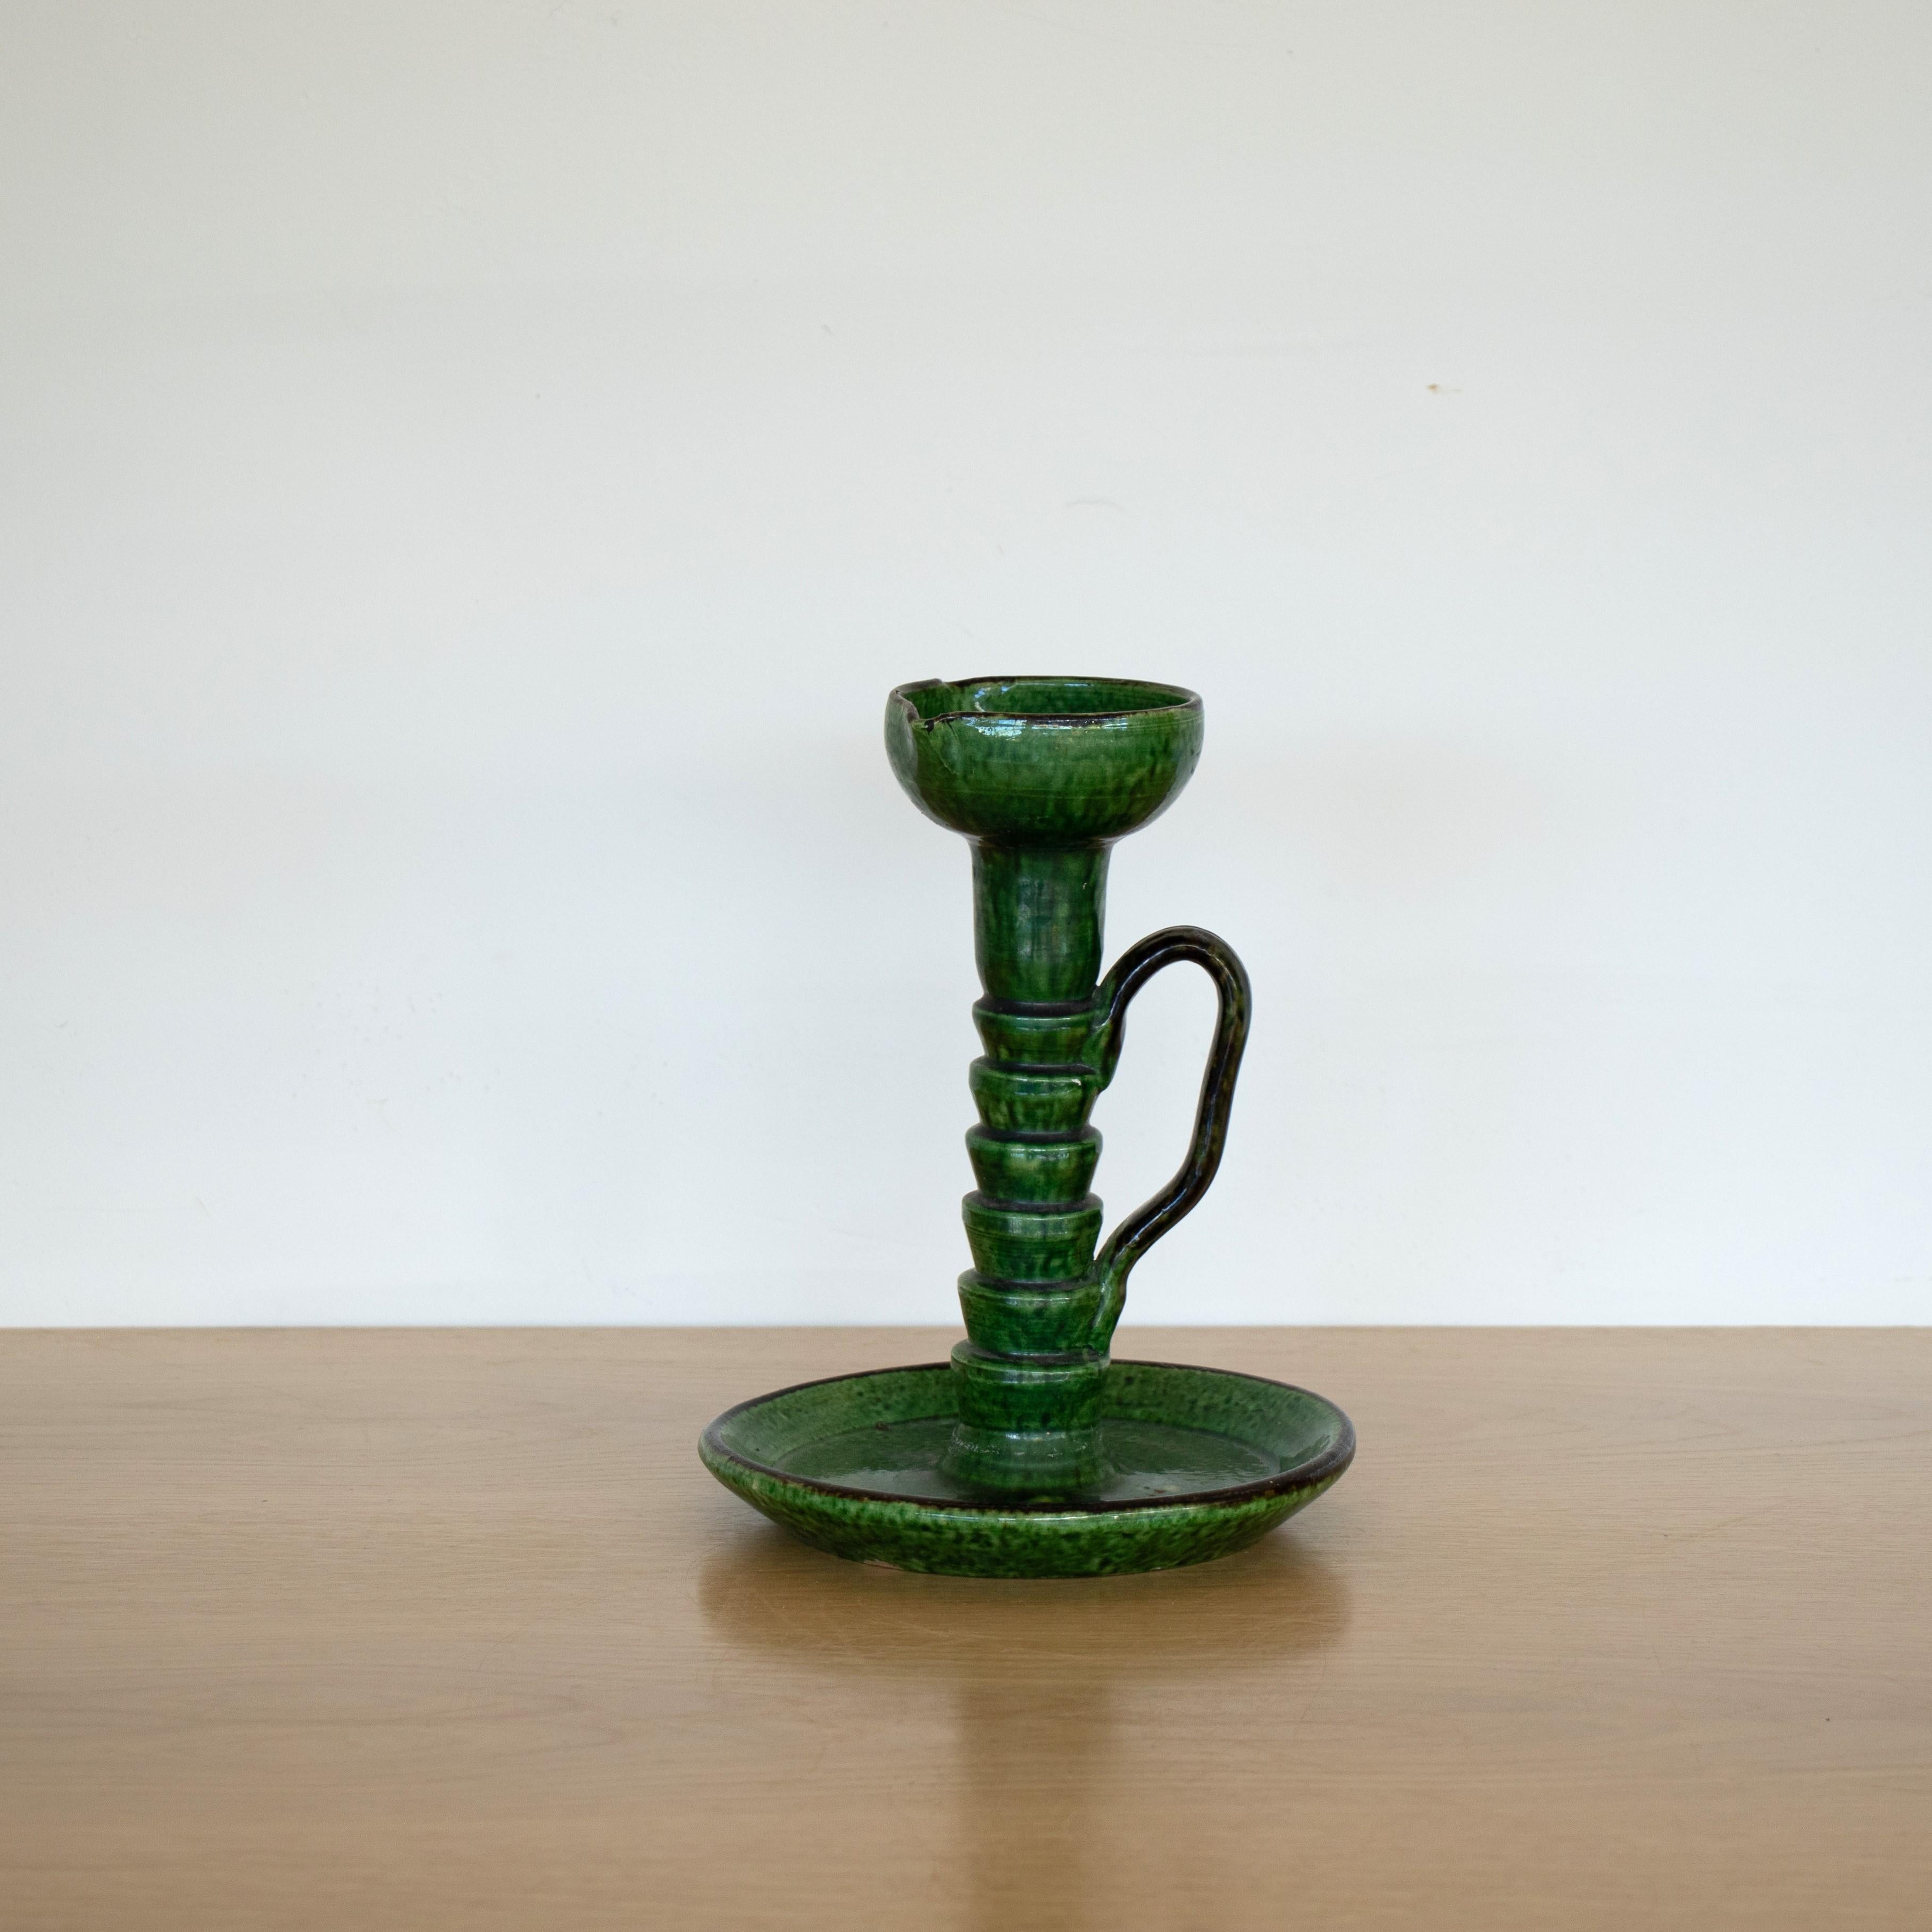 Lovely vintage ceramic candlestick holder with deep green glaze and loop handle, from Vallauris, France.